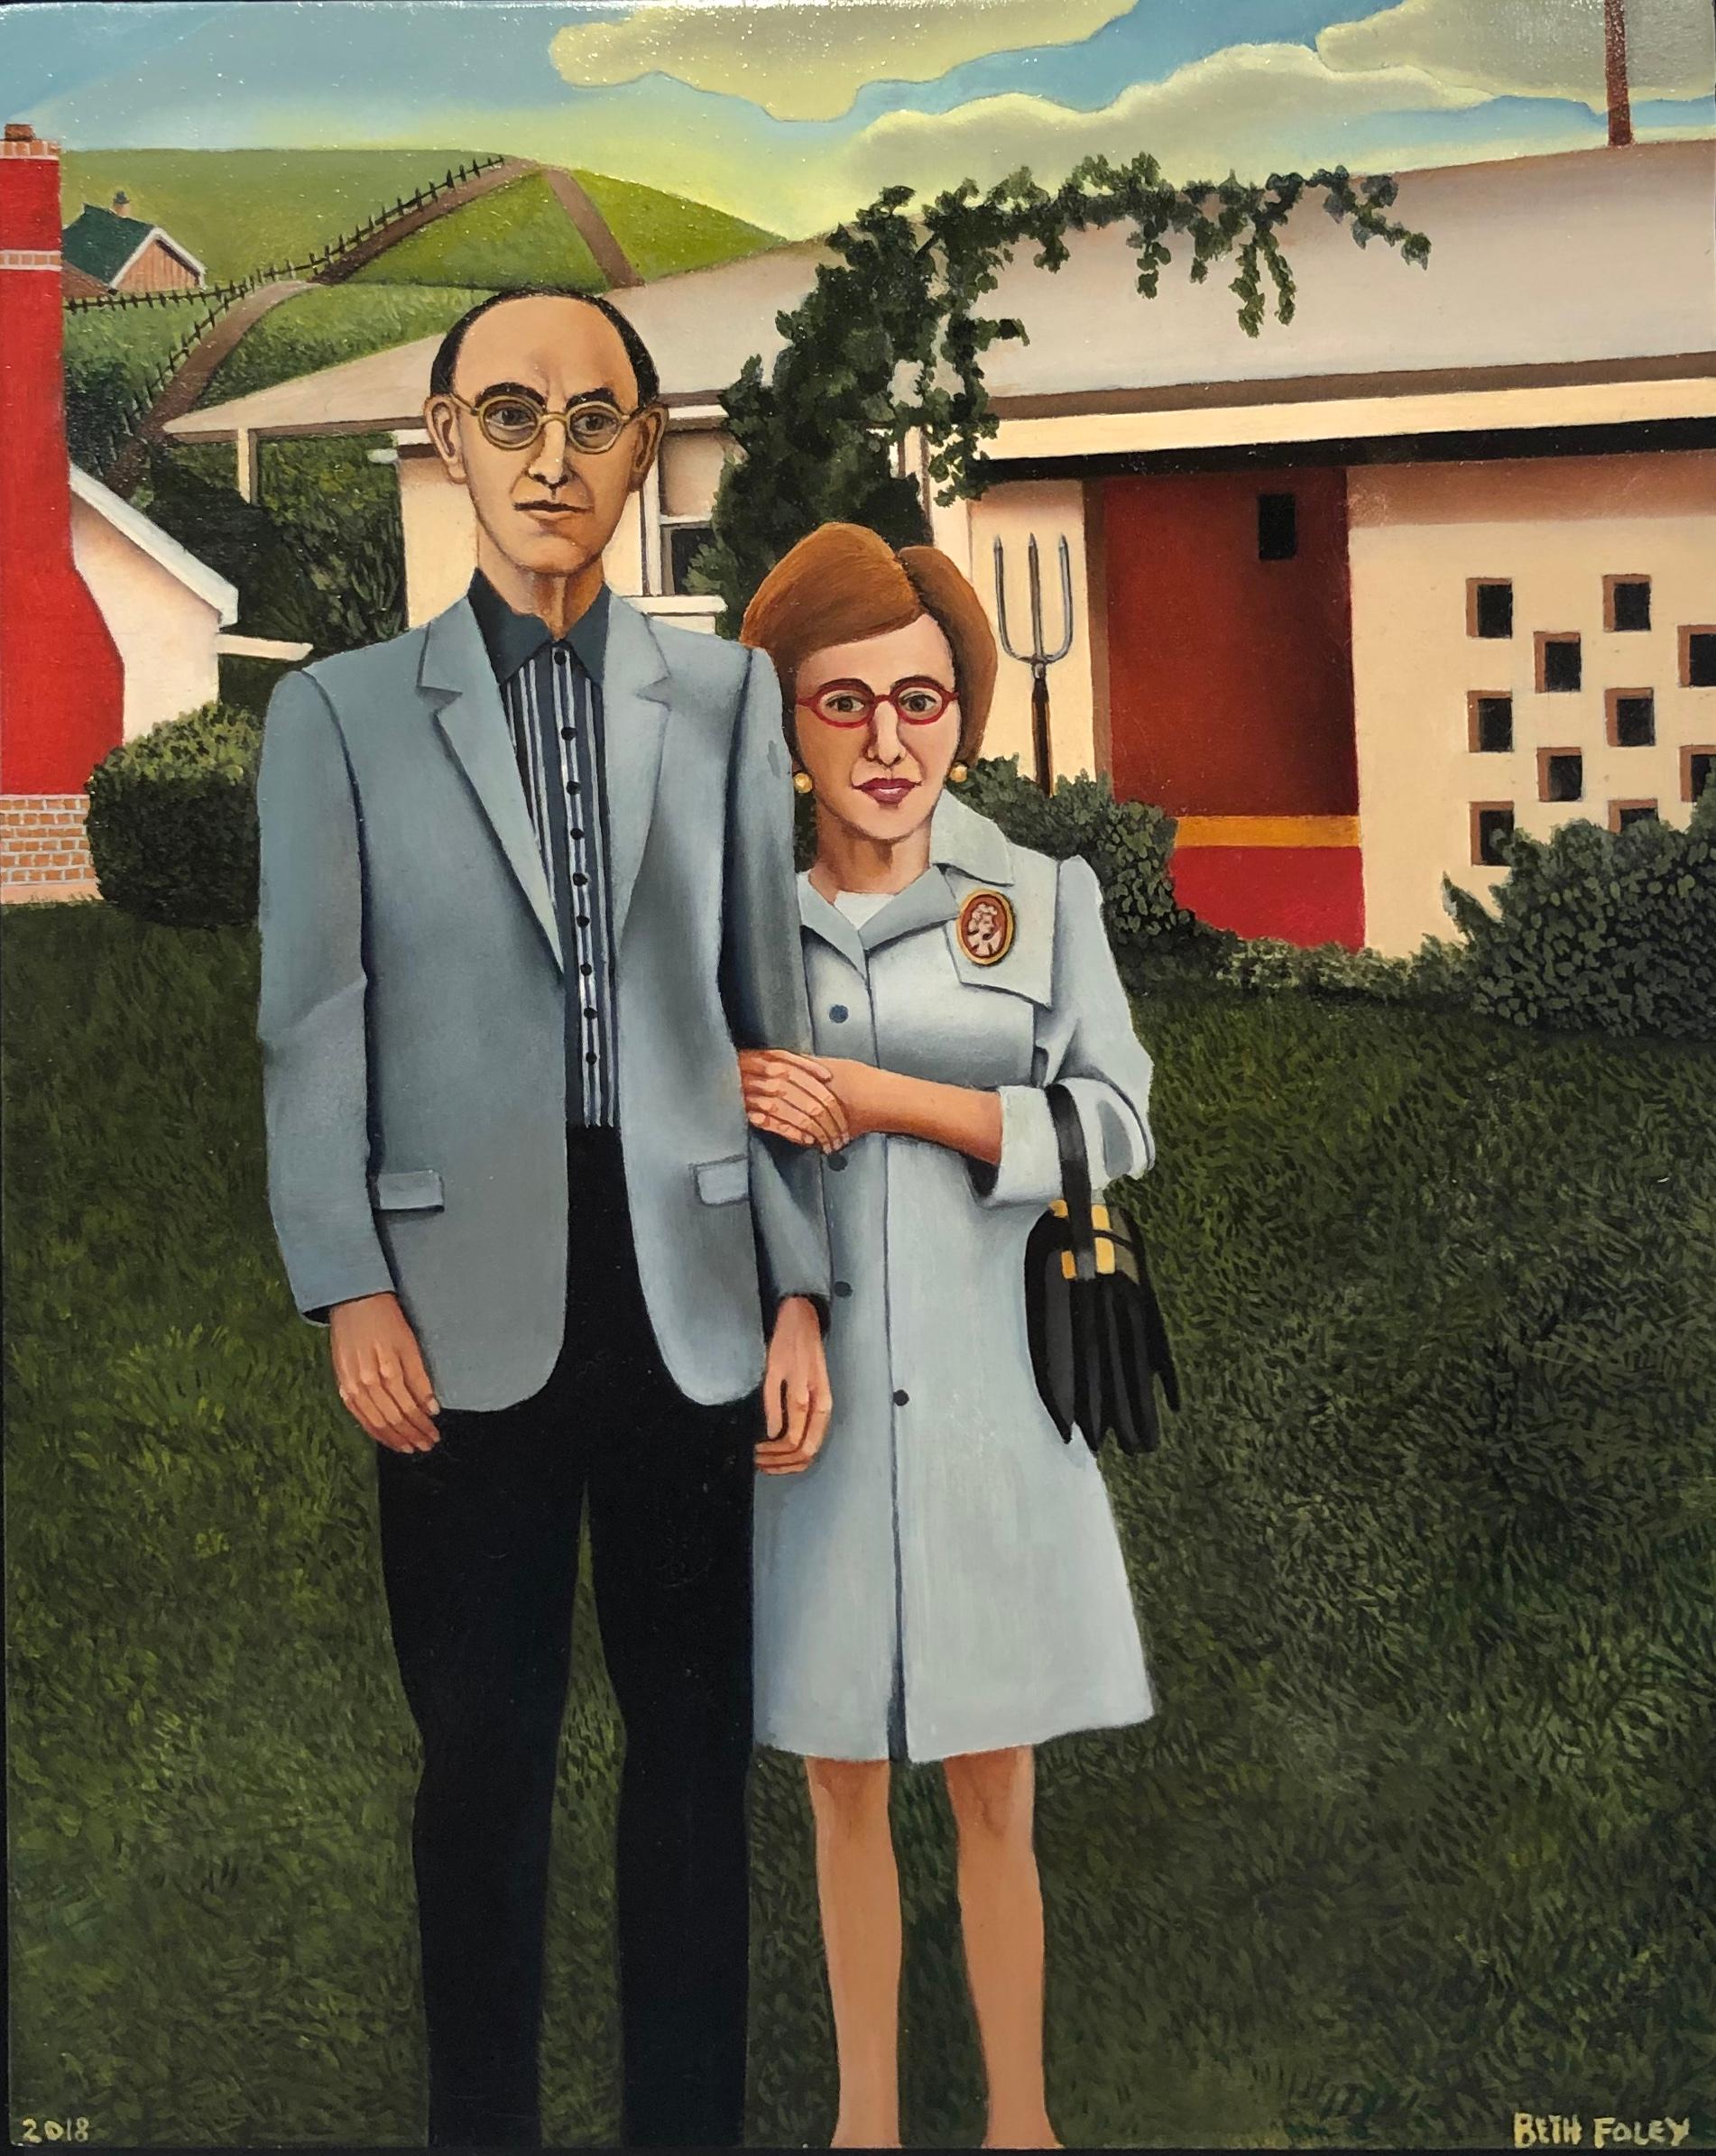 Beth Foley Landscape Painting - Jewish American Gothic, Homage to Grant Wood, Original Oil on Panel, Framed